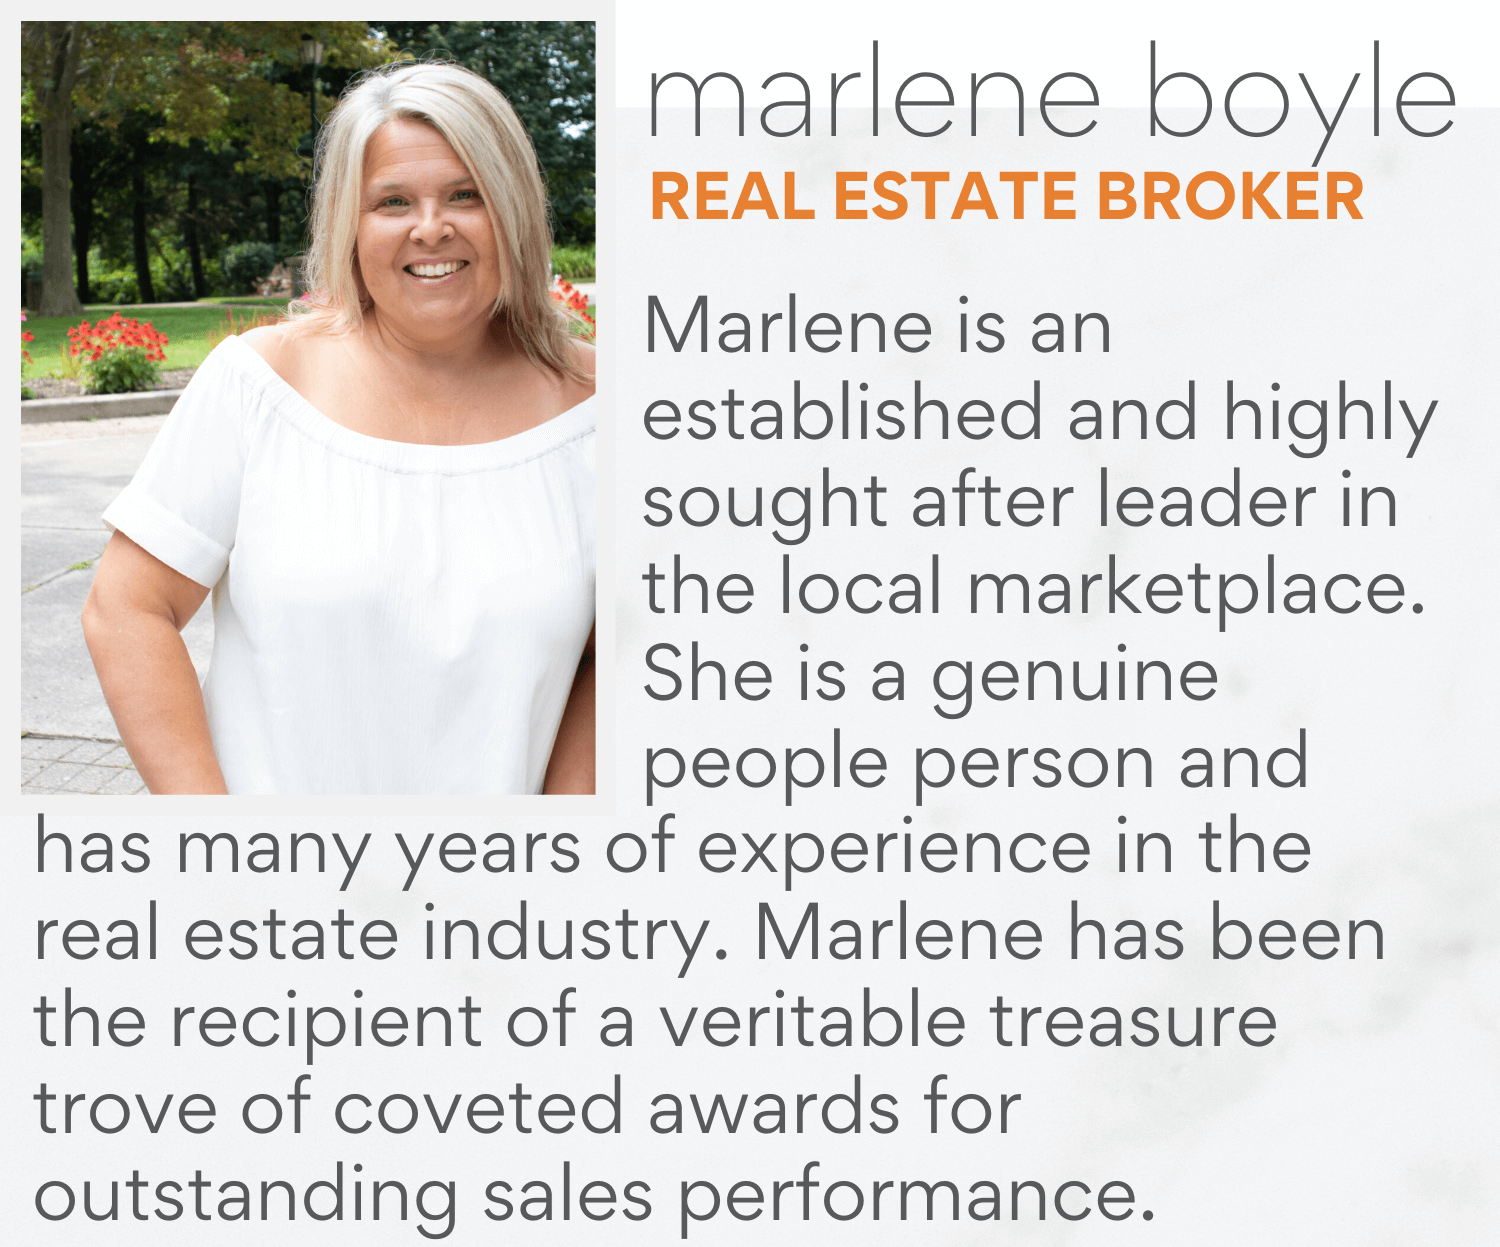 Marlene is an established and highly sought after leader in the local marketplace. She is a genuine people person and has many years of experience in the real estate industry. Marlene has been the recipient of a veritable treasure trove of coveted awards for outstanding sales performance.